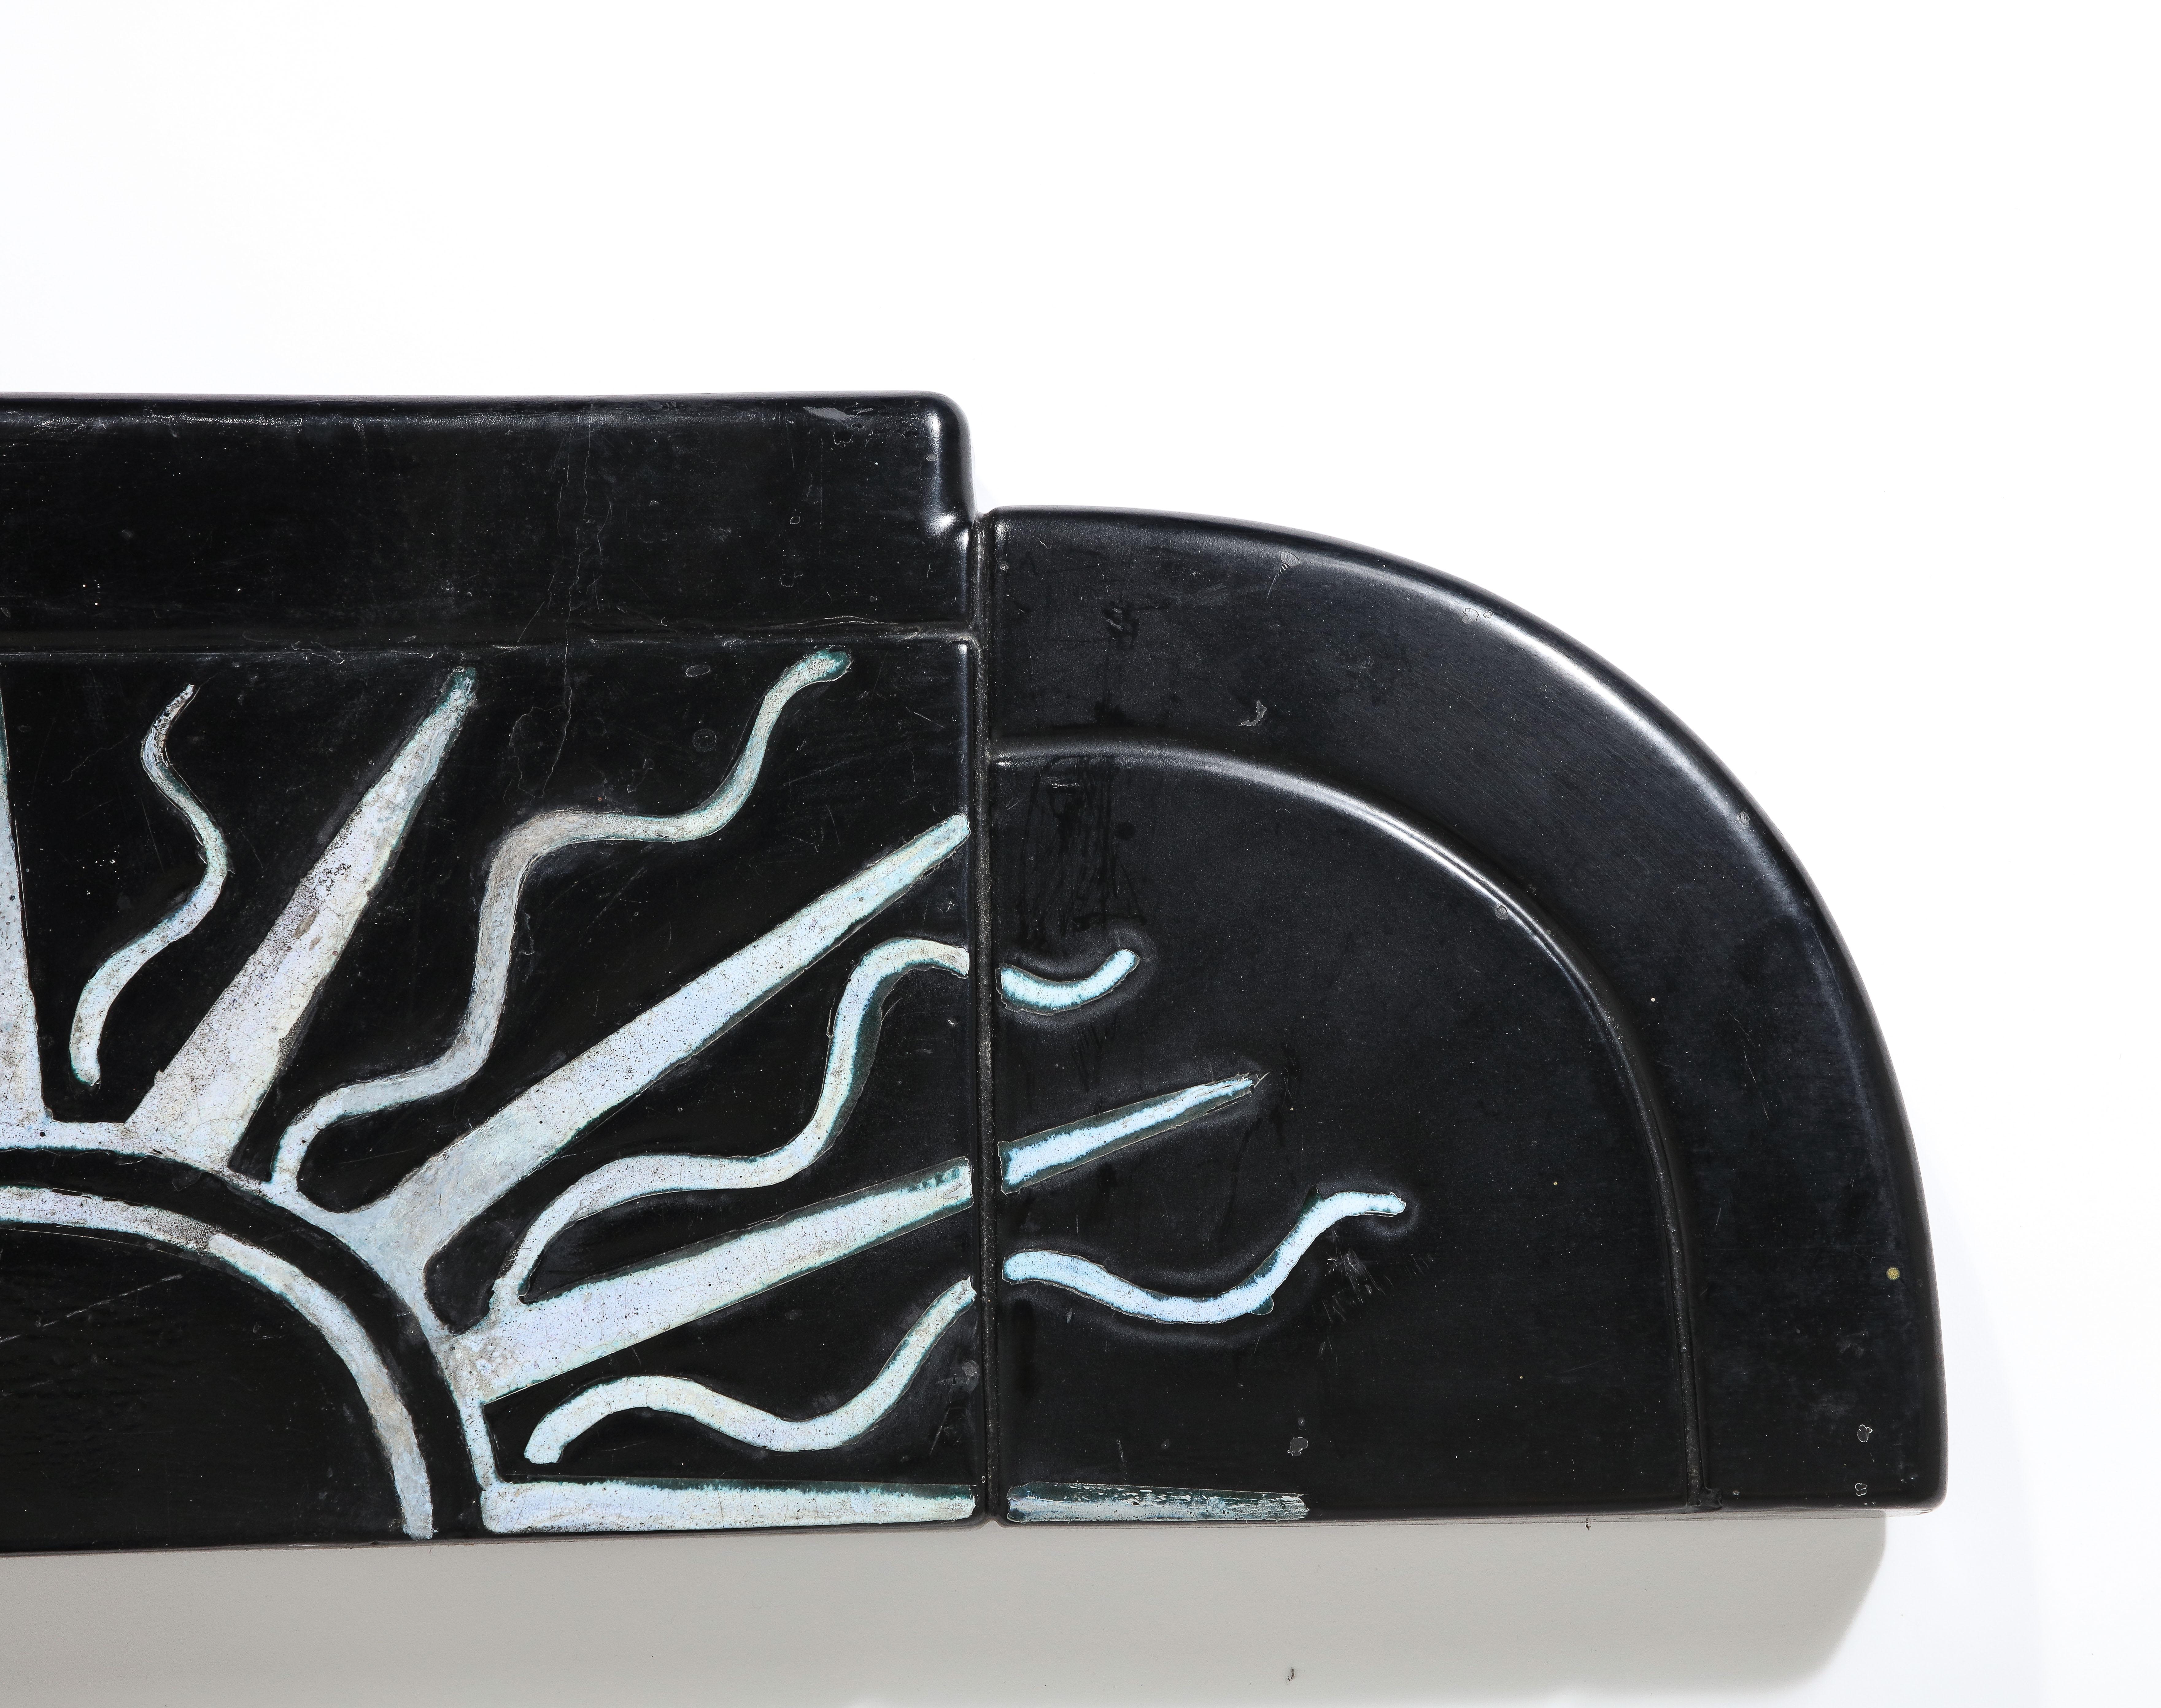 Mid-Century Modern Georges Jouve Style Ceramic Wall Hanging Console with Deco Motif, France 1950's For Sale